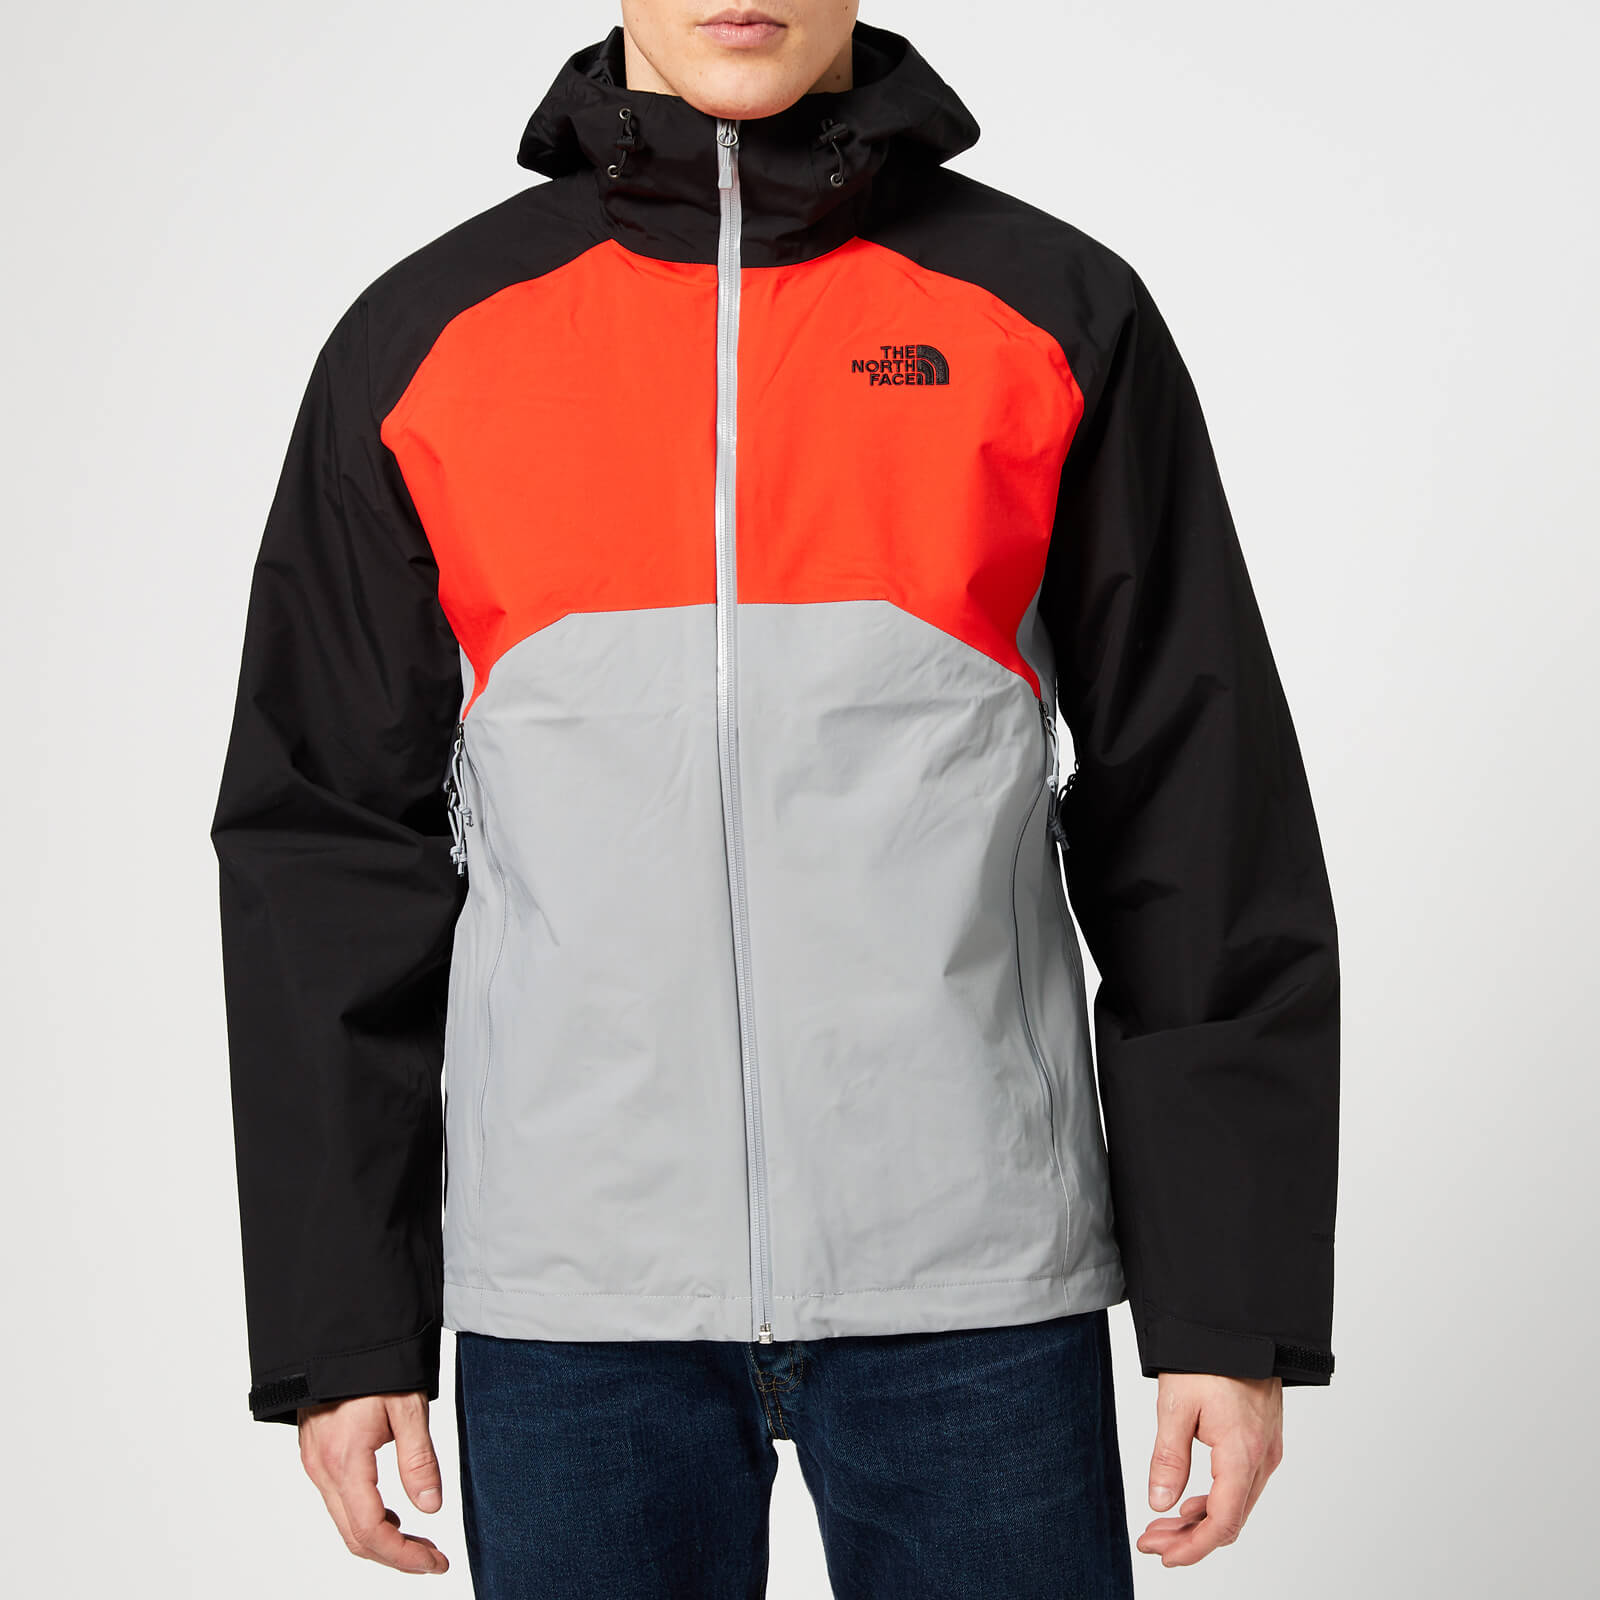 grey and red north face jacket